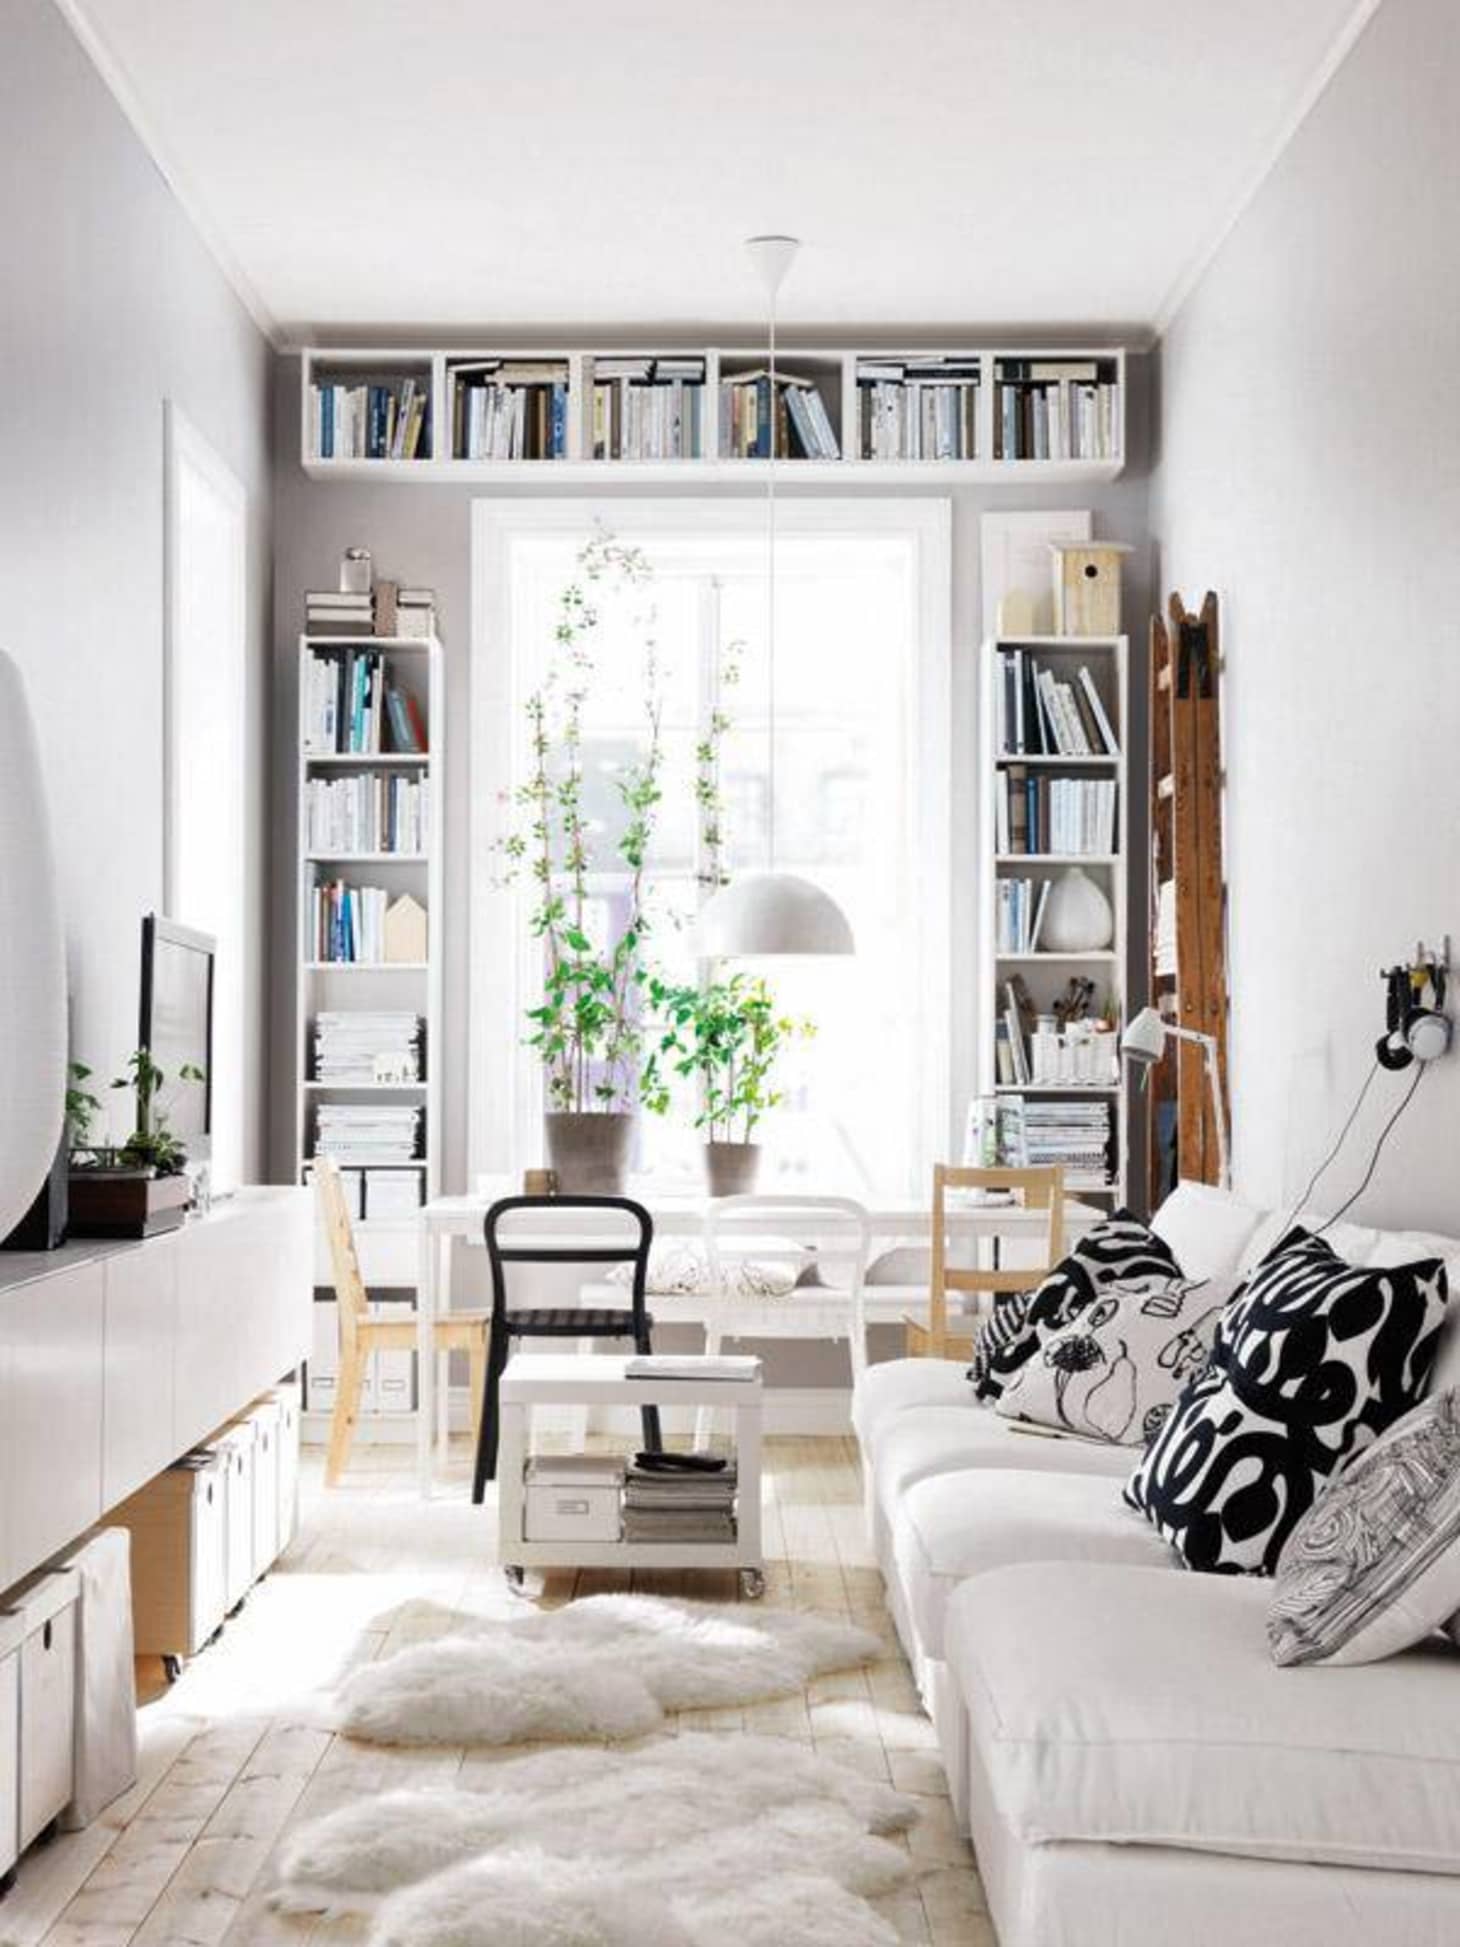 Small Space Interior Design: Making The Most Of Limited Spaces